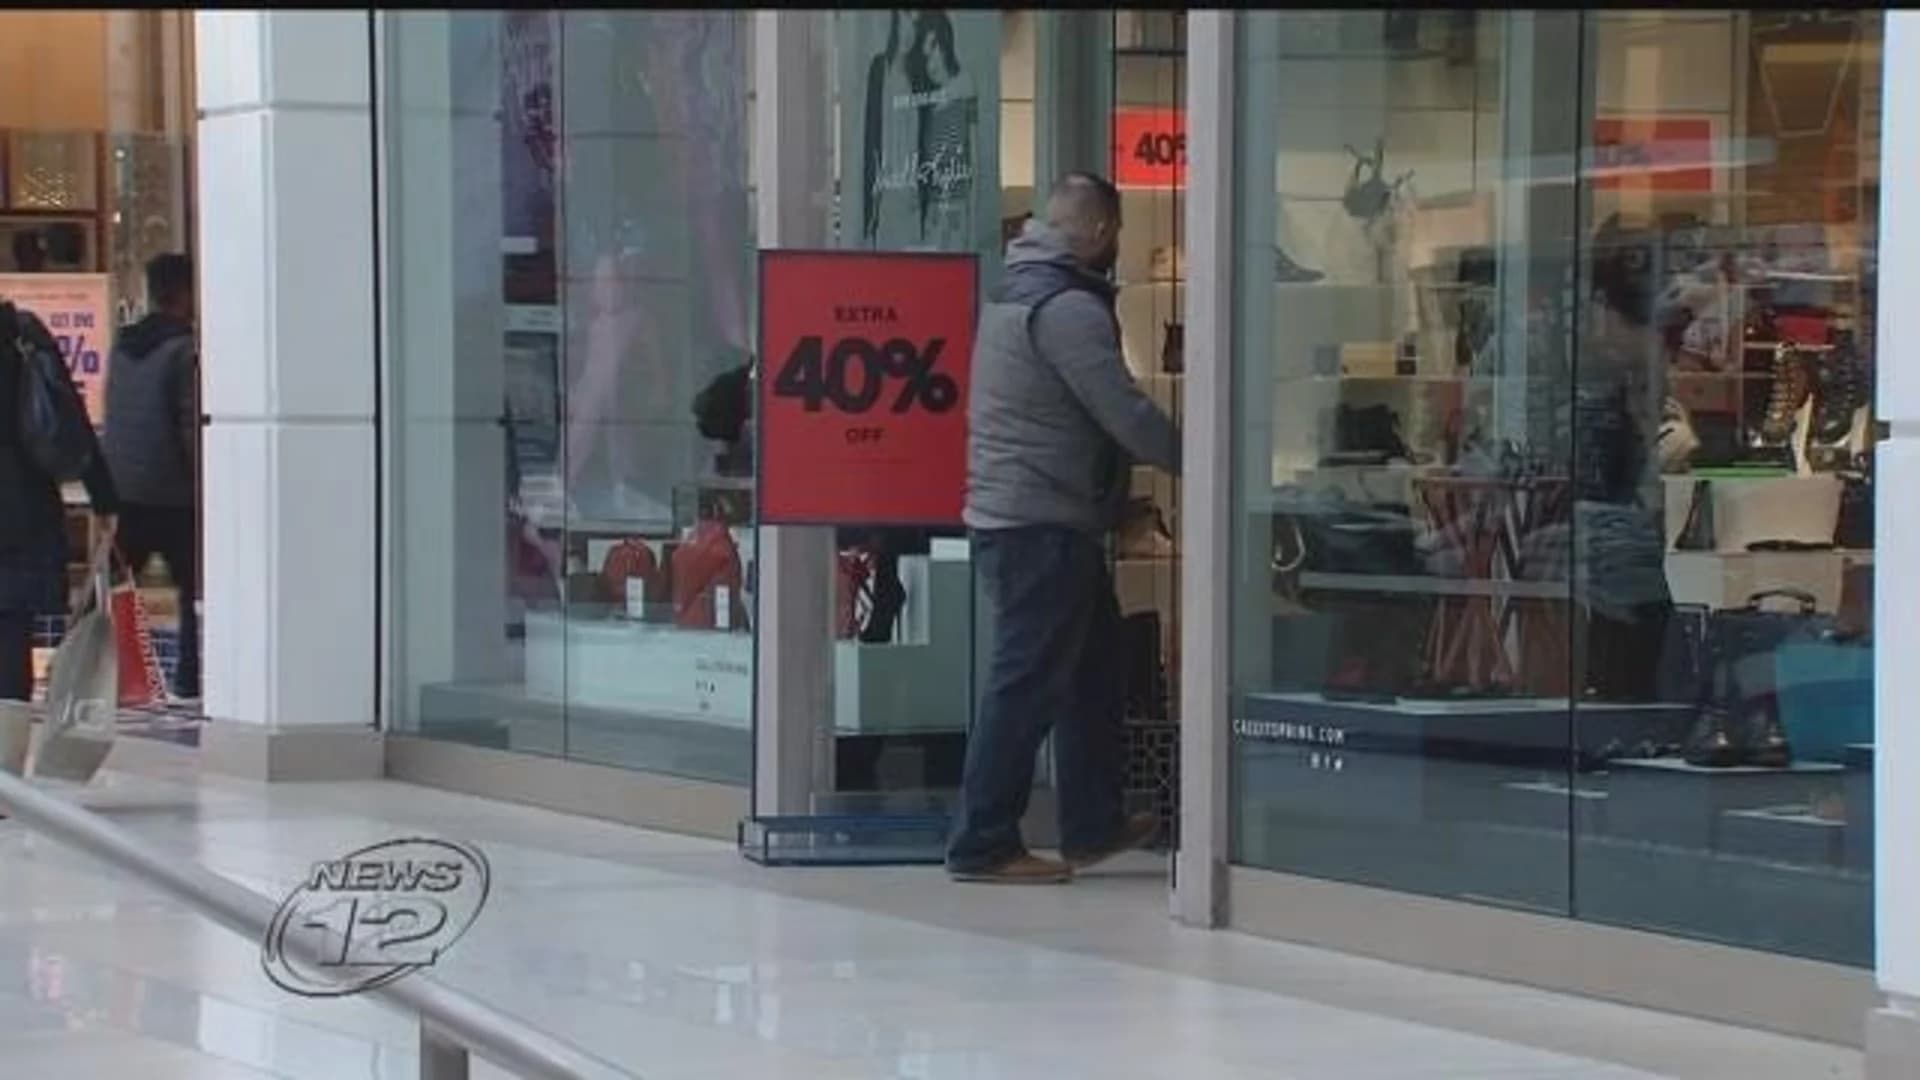 Christmas countdown is on for holiday shoppers